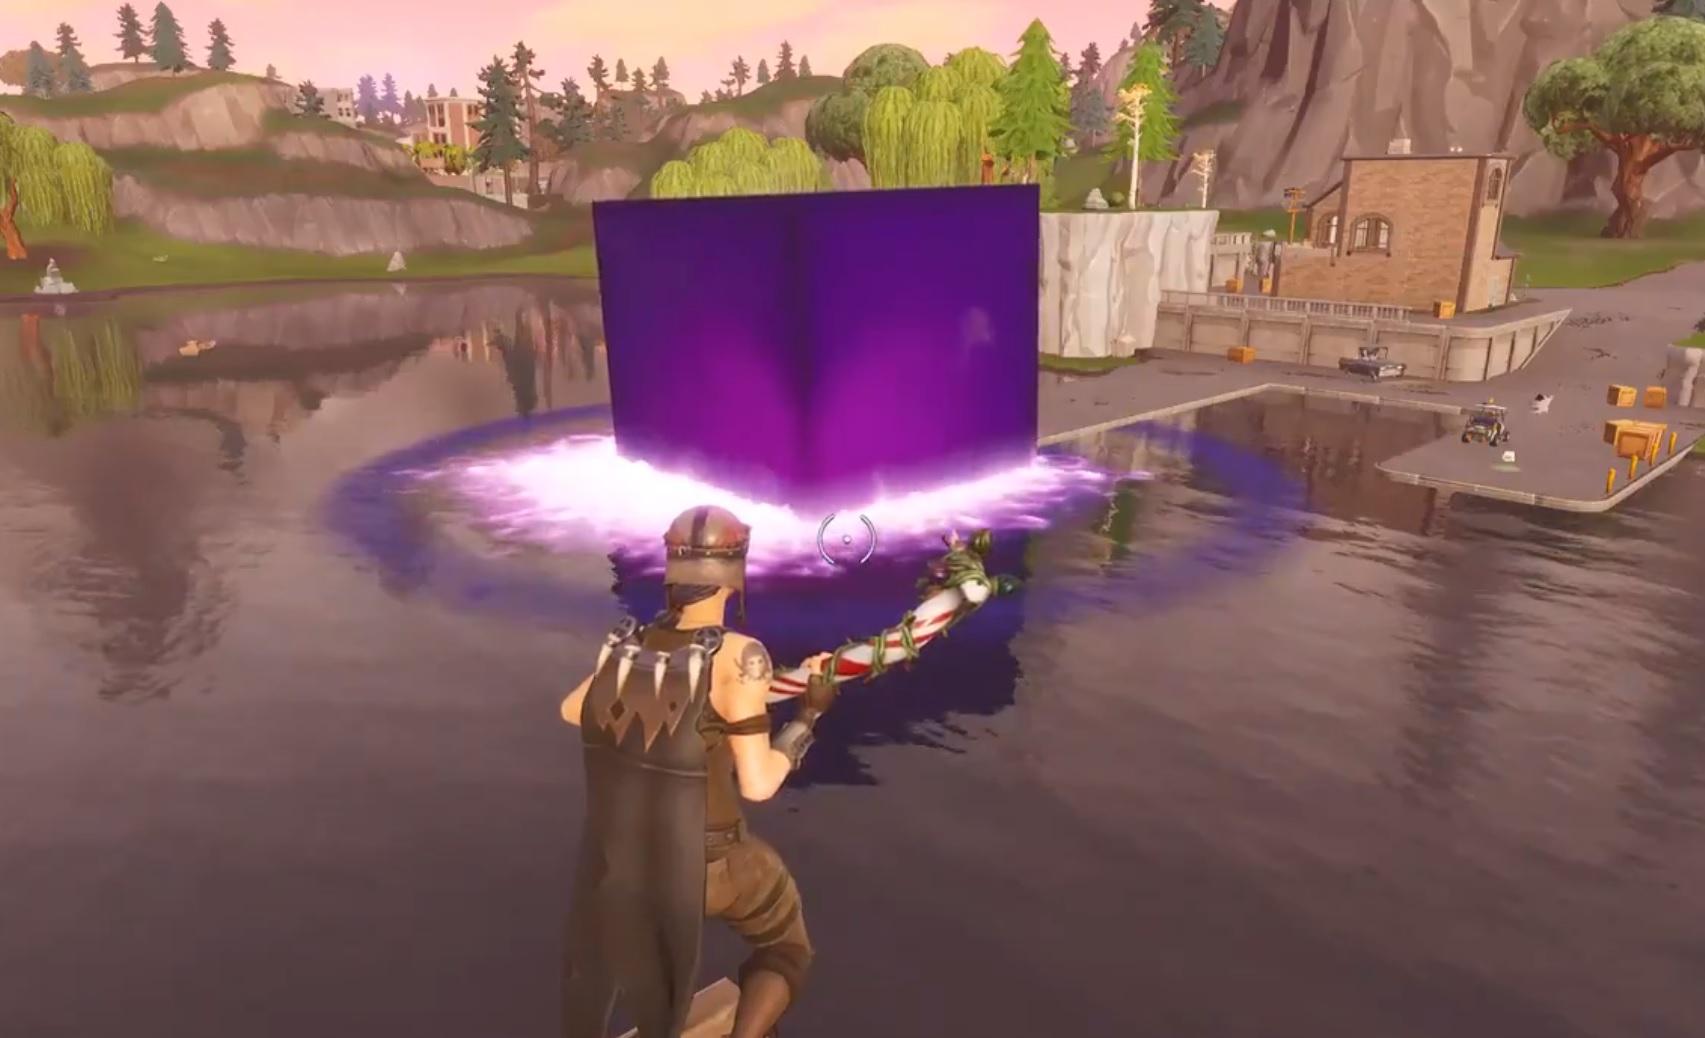 The purple cube rolled into Loot Lake, transforming Fortnite's main water feature into a giant trampoline ahead of Season 6